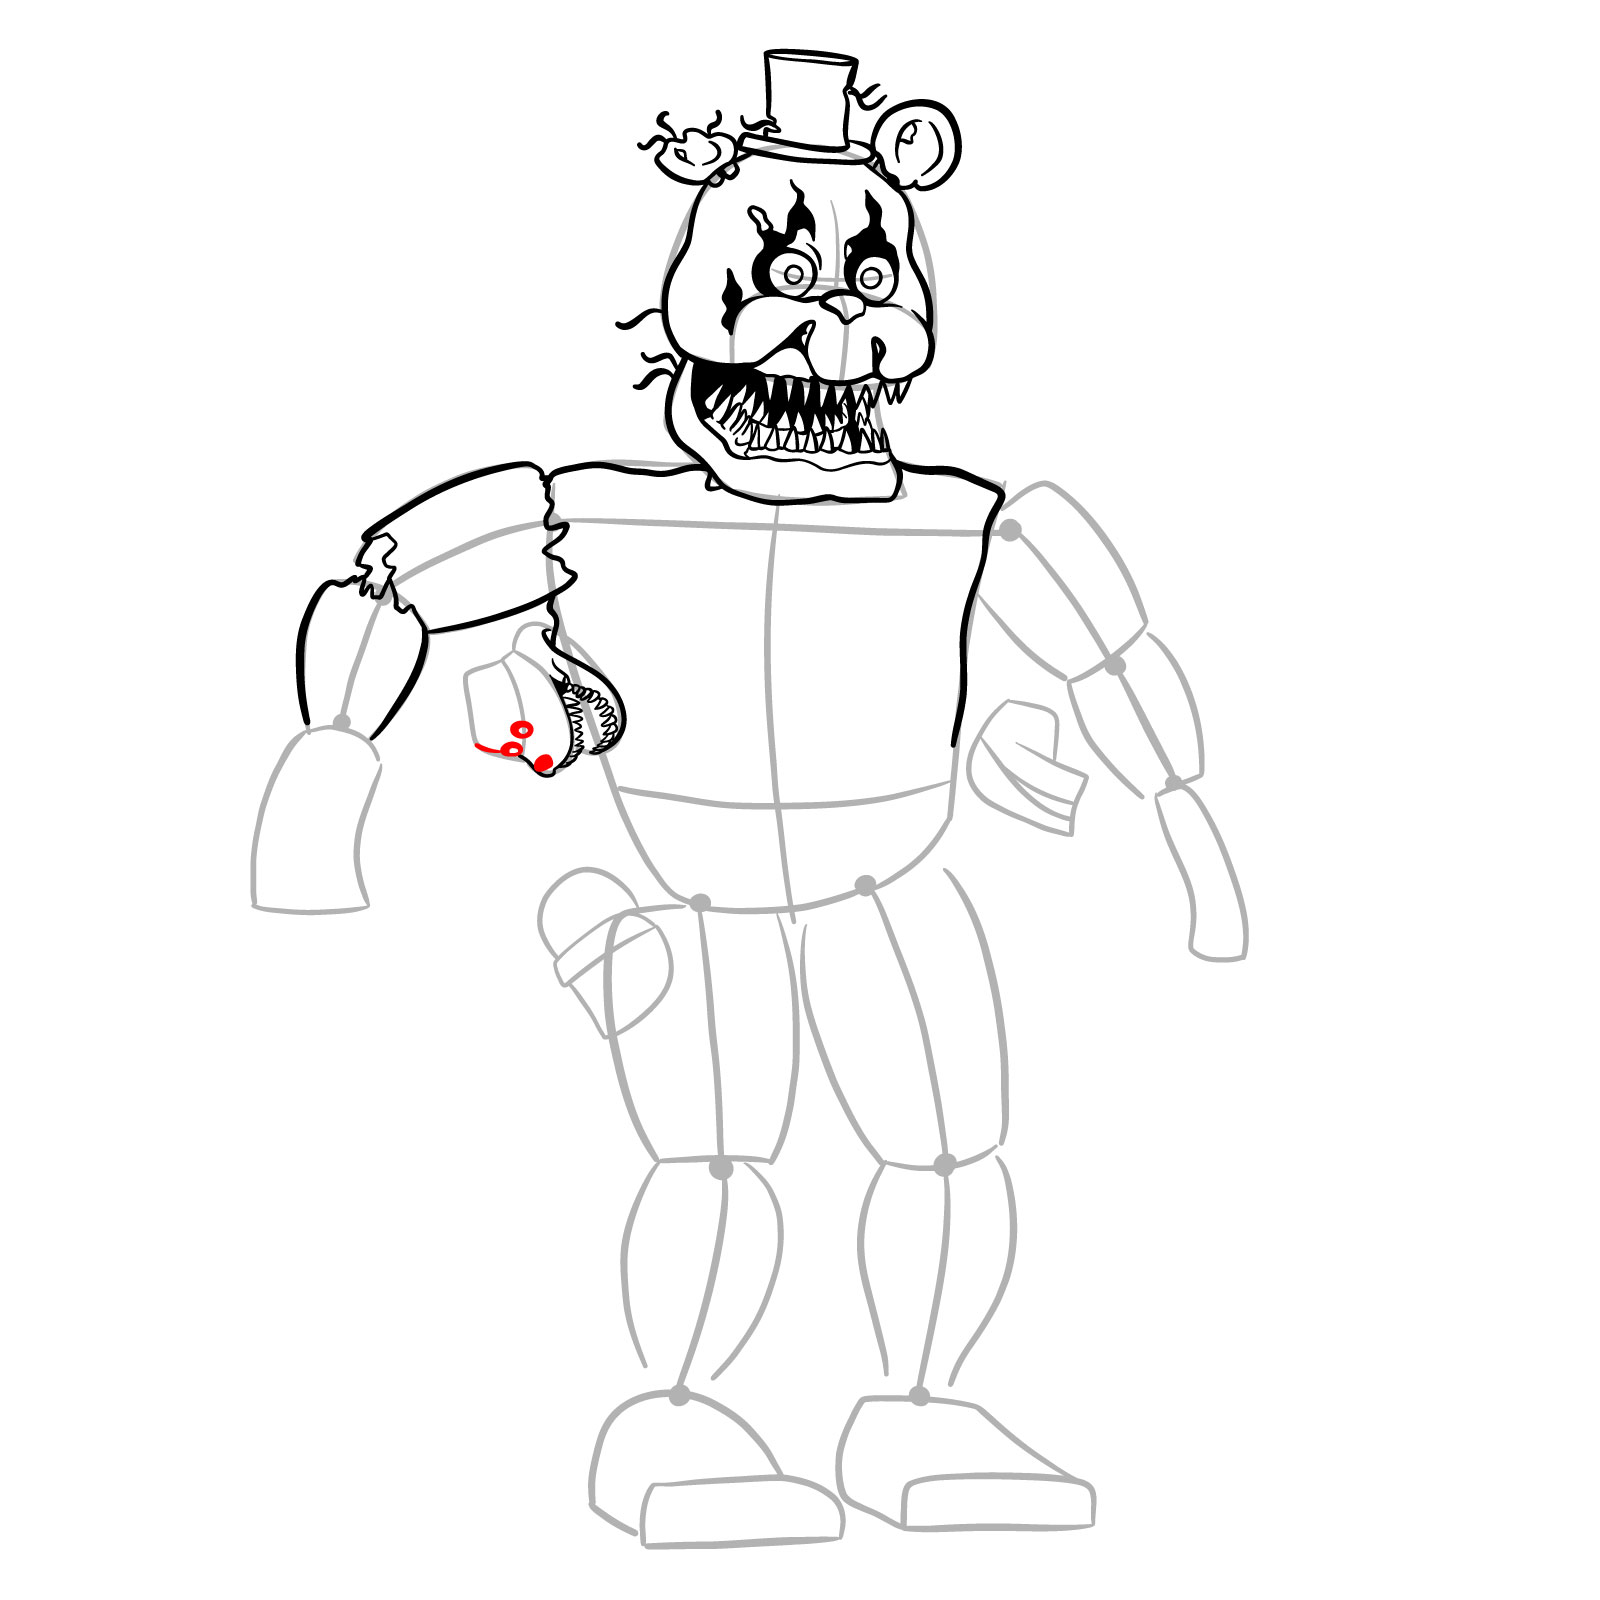 How to draw Nightmare Freddy - step 21